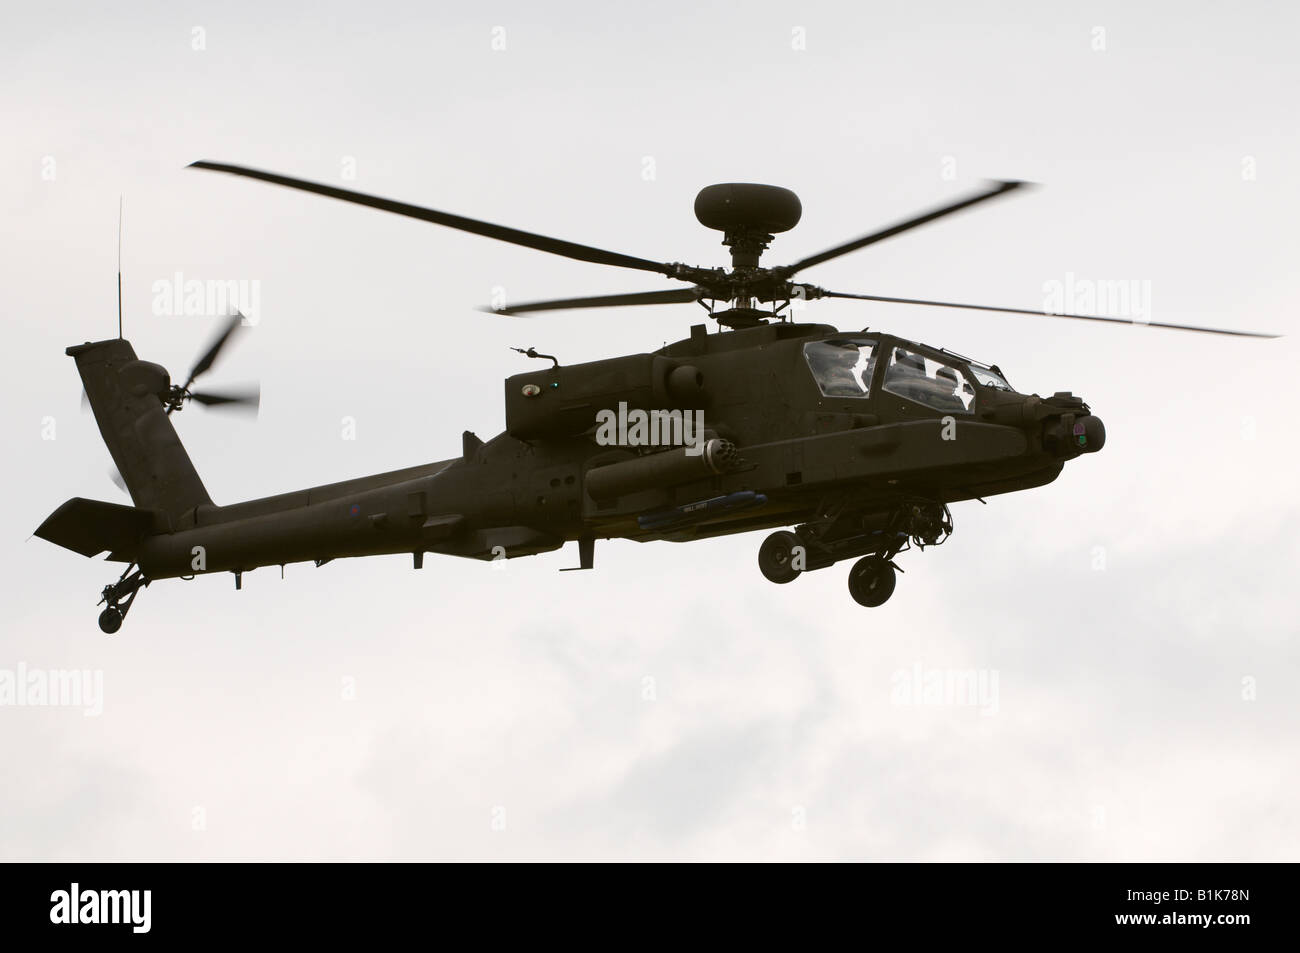 Boeing AH-64D Longbow Apache Helicopter Kemble Air Show 2008 Stock Photo